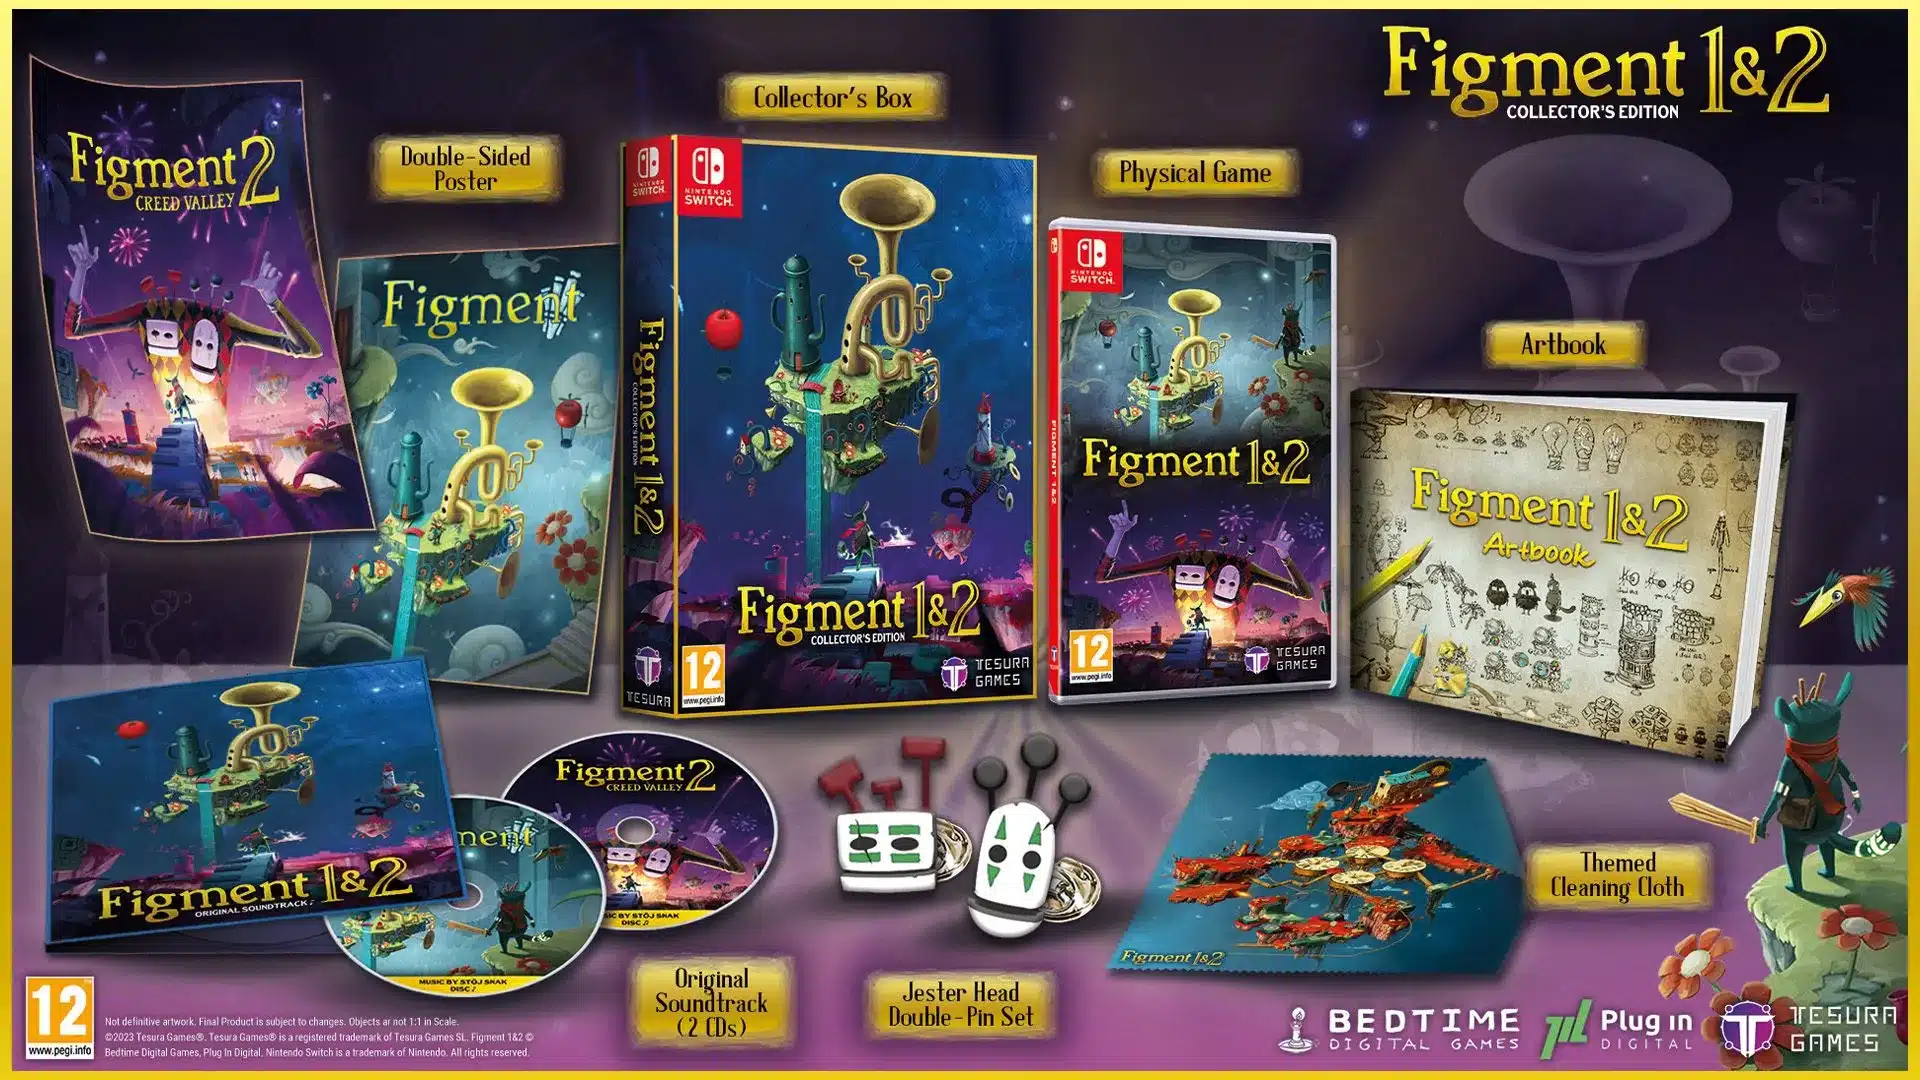 Figment 1 2 collector 1